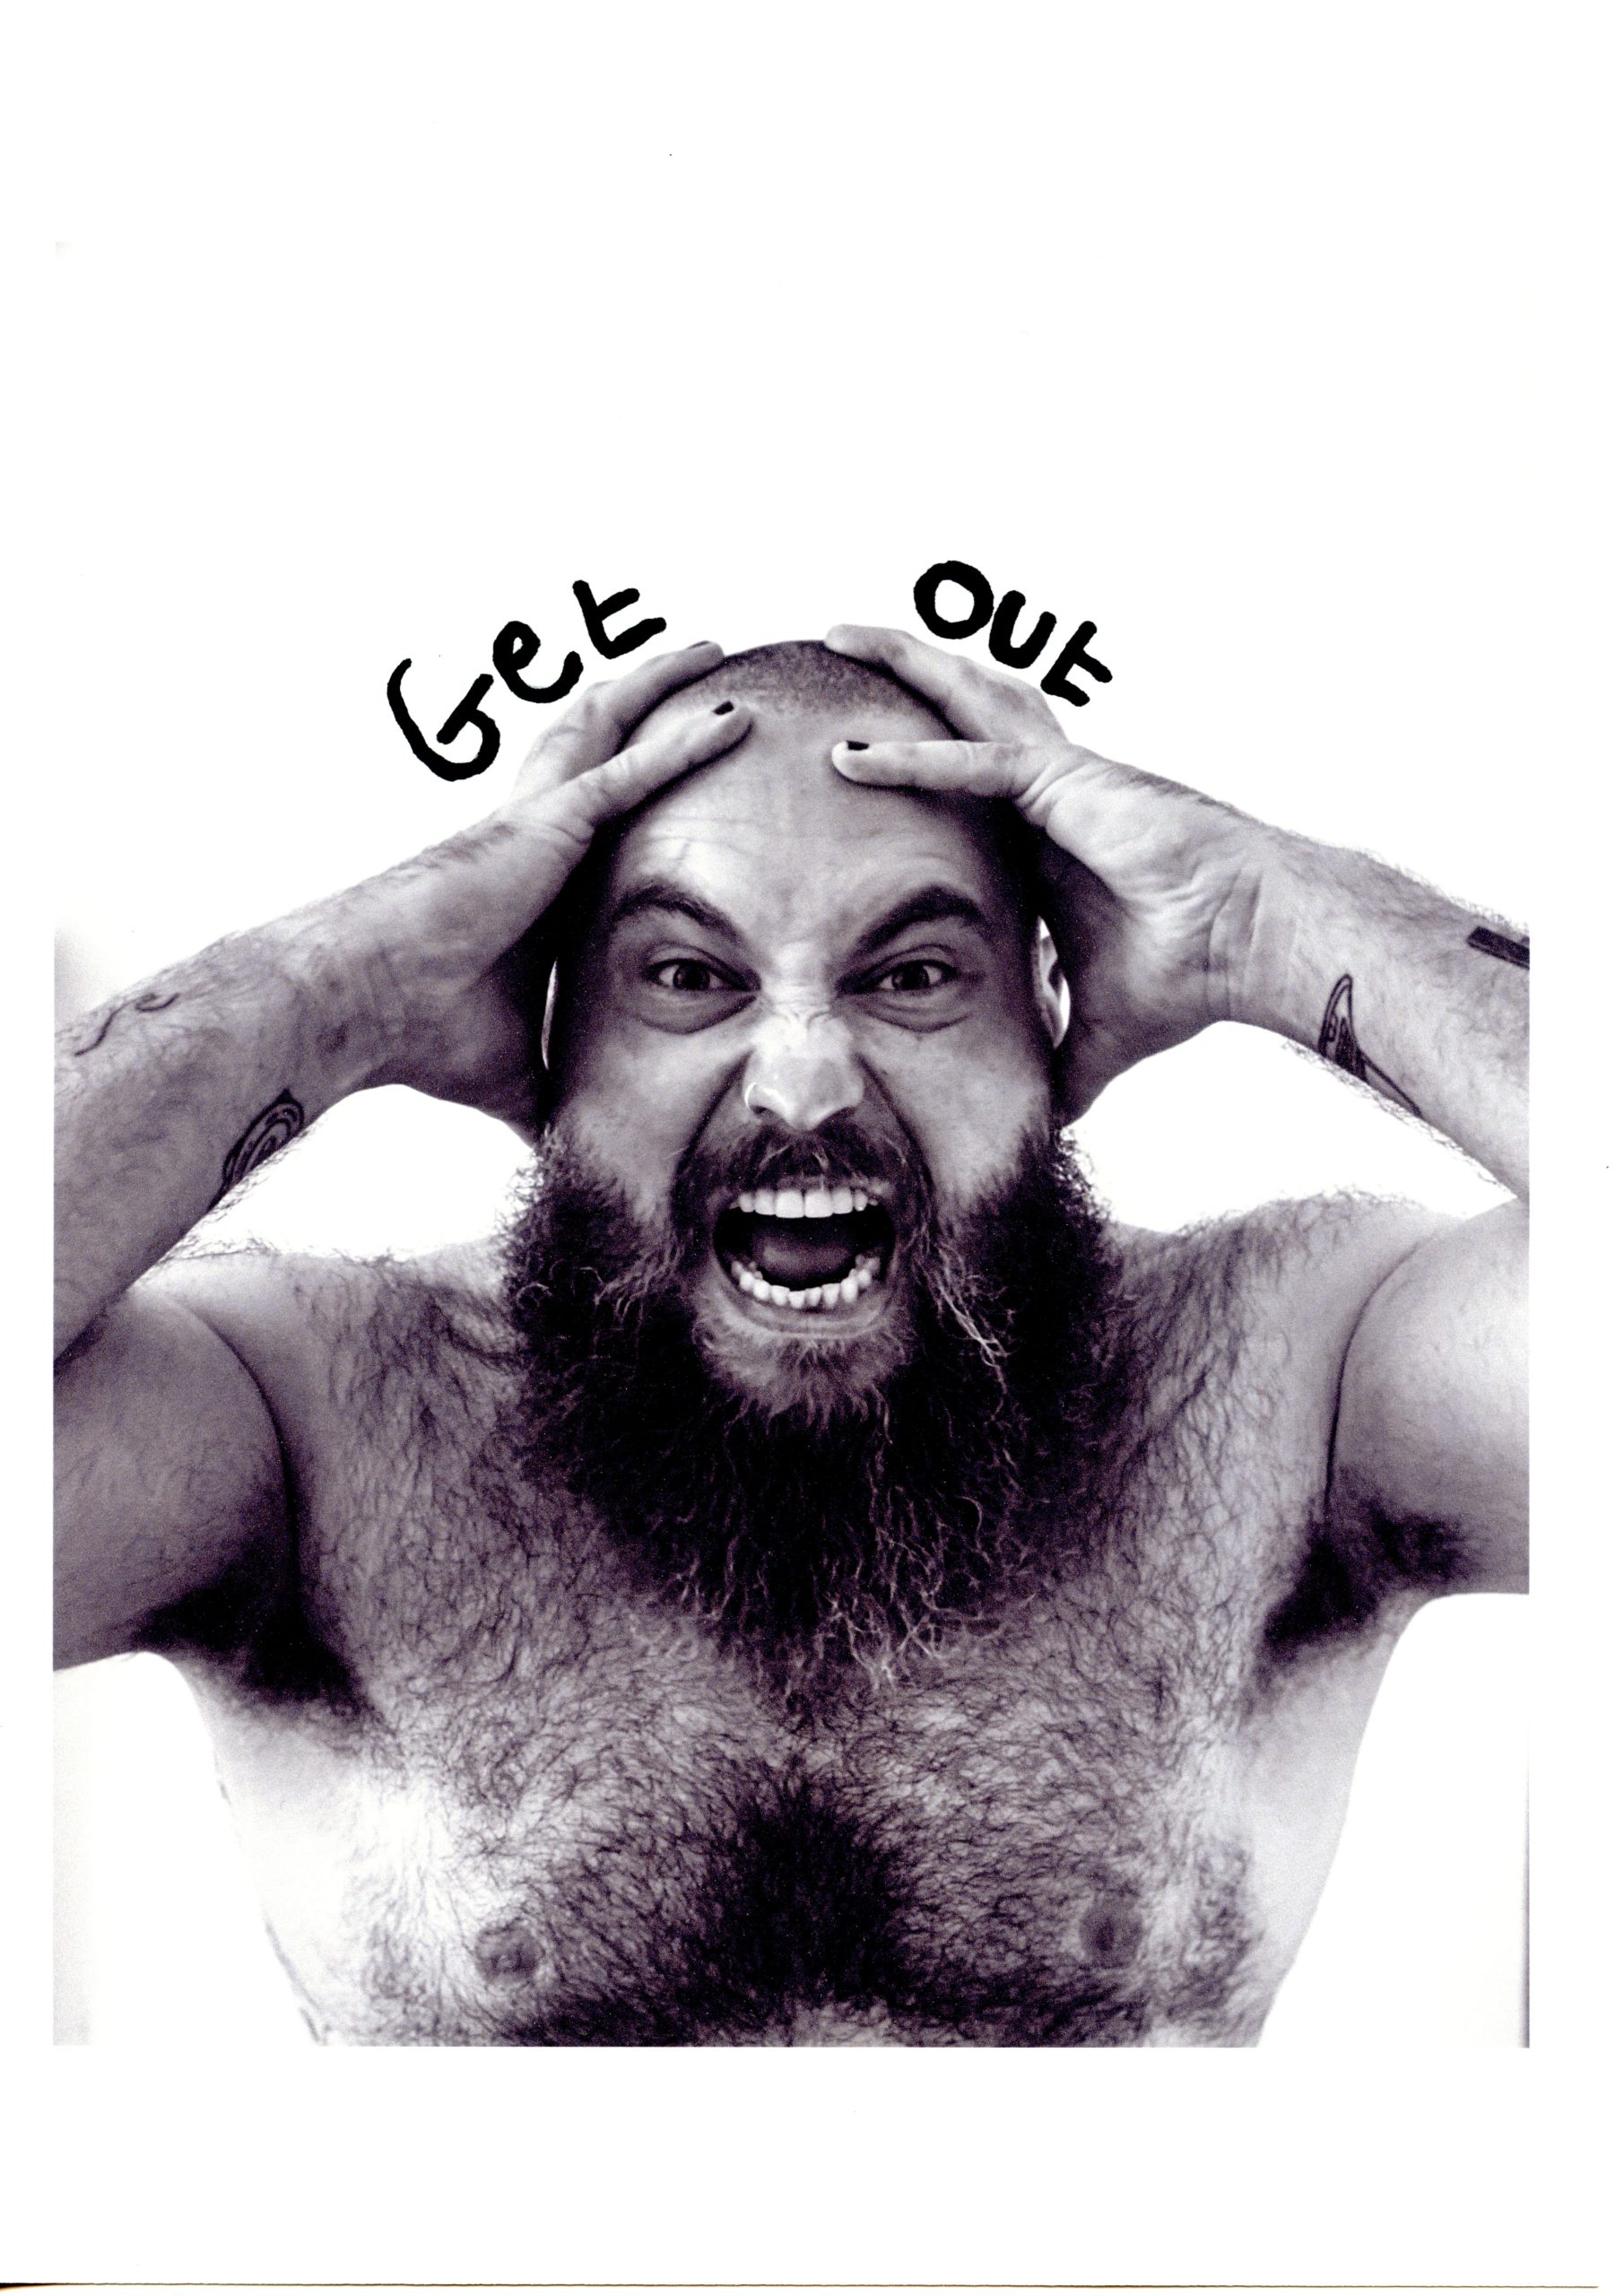 Porttait photo of artist Jacob Dear, topless, holding his head and screaming with the words 'Get Out' written above his head.